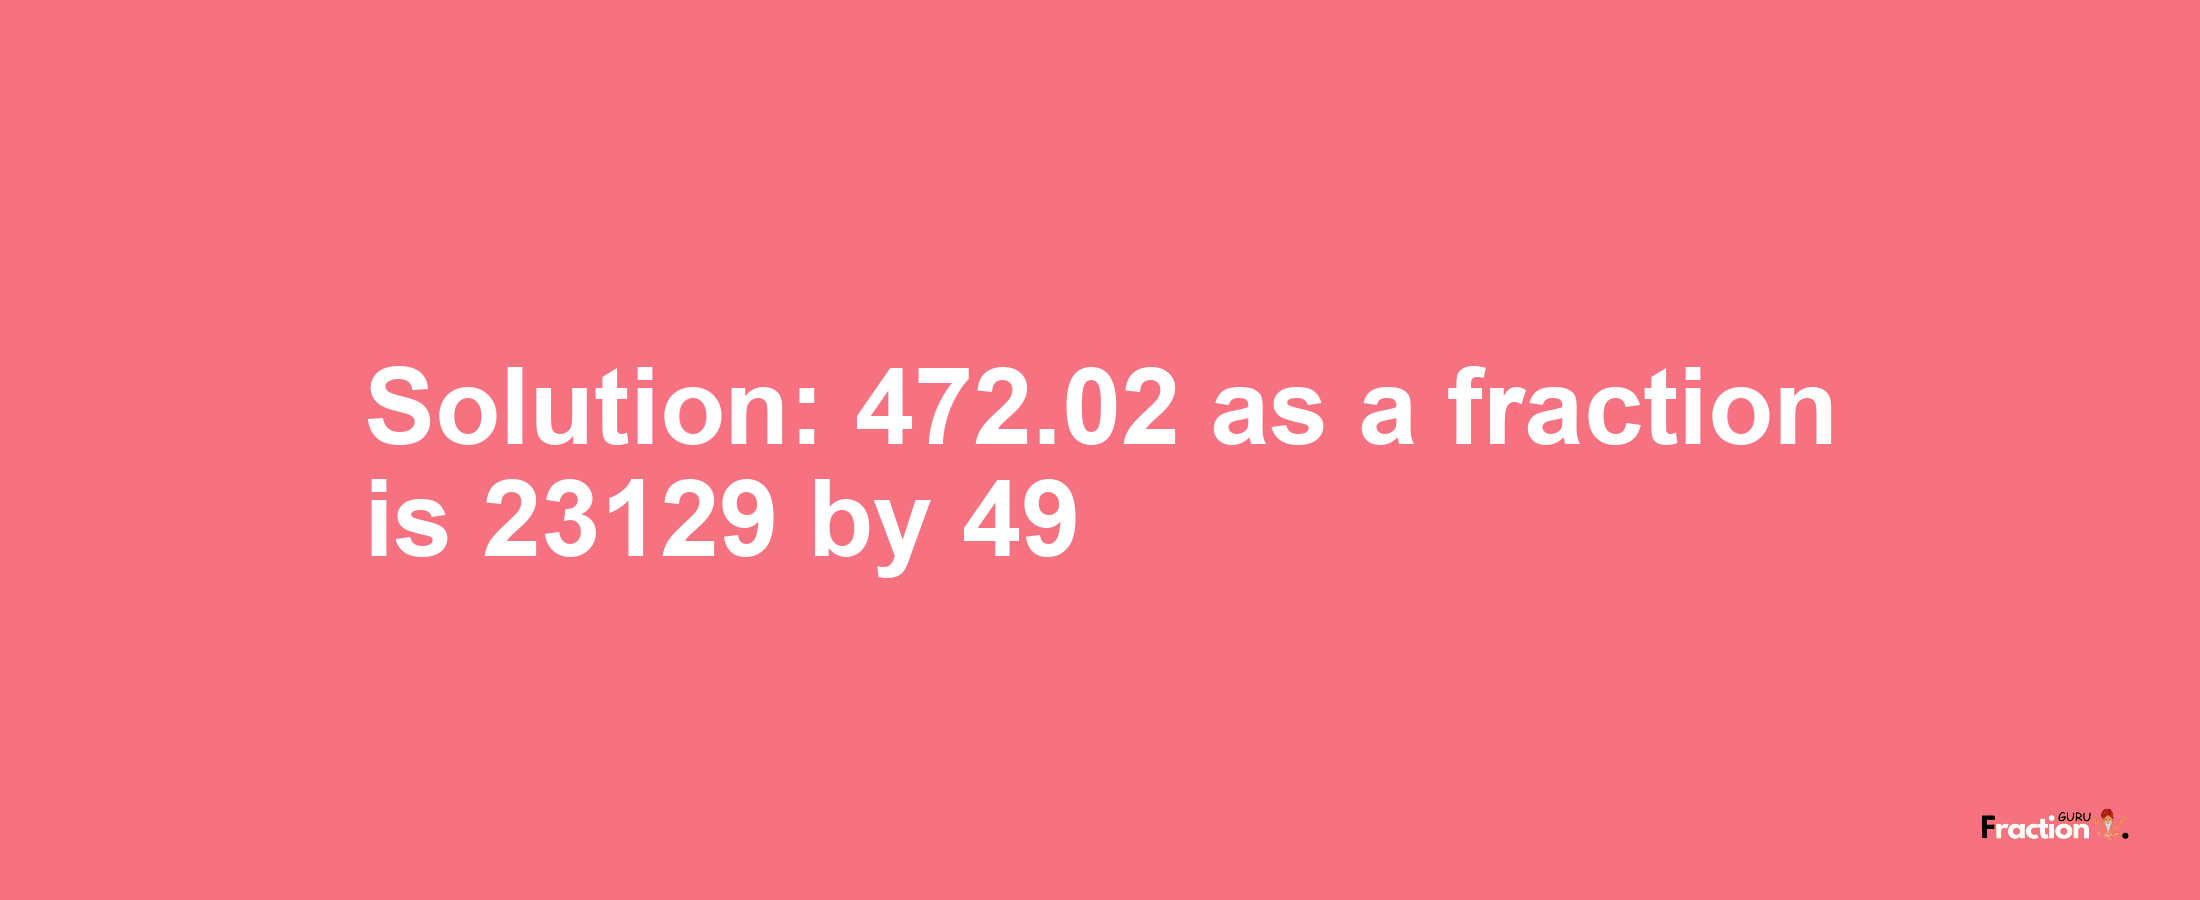 Solution:472.02 as a fraction is 23129/49